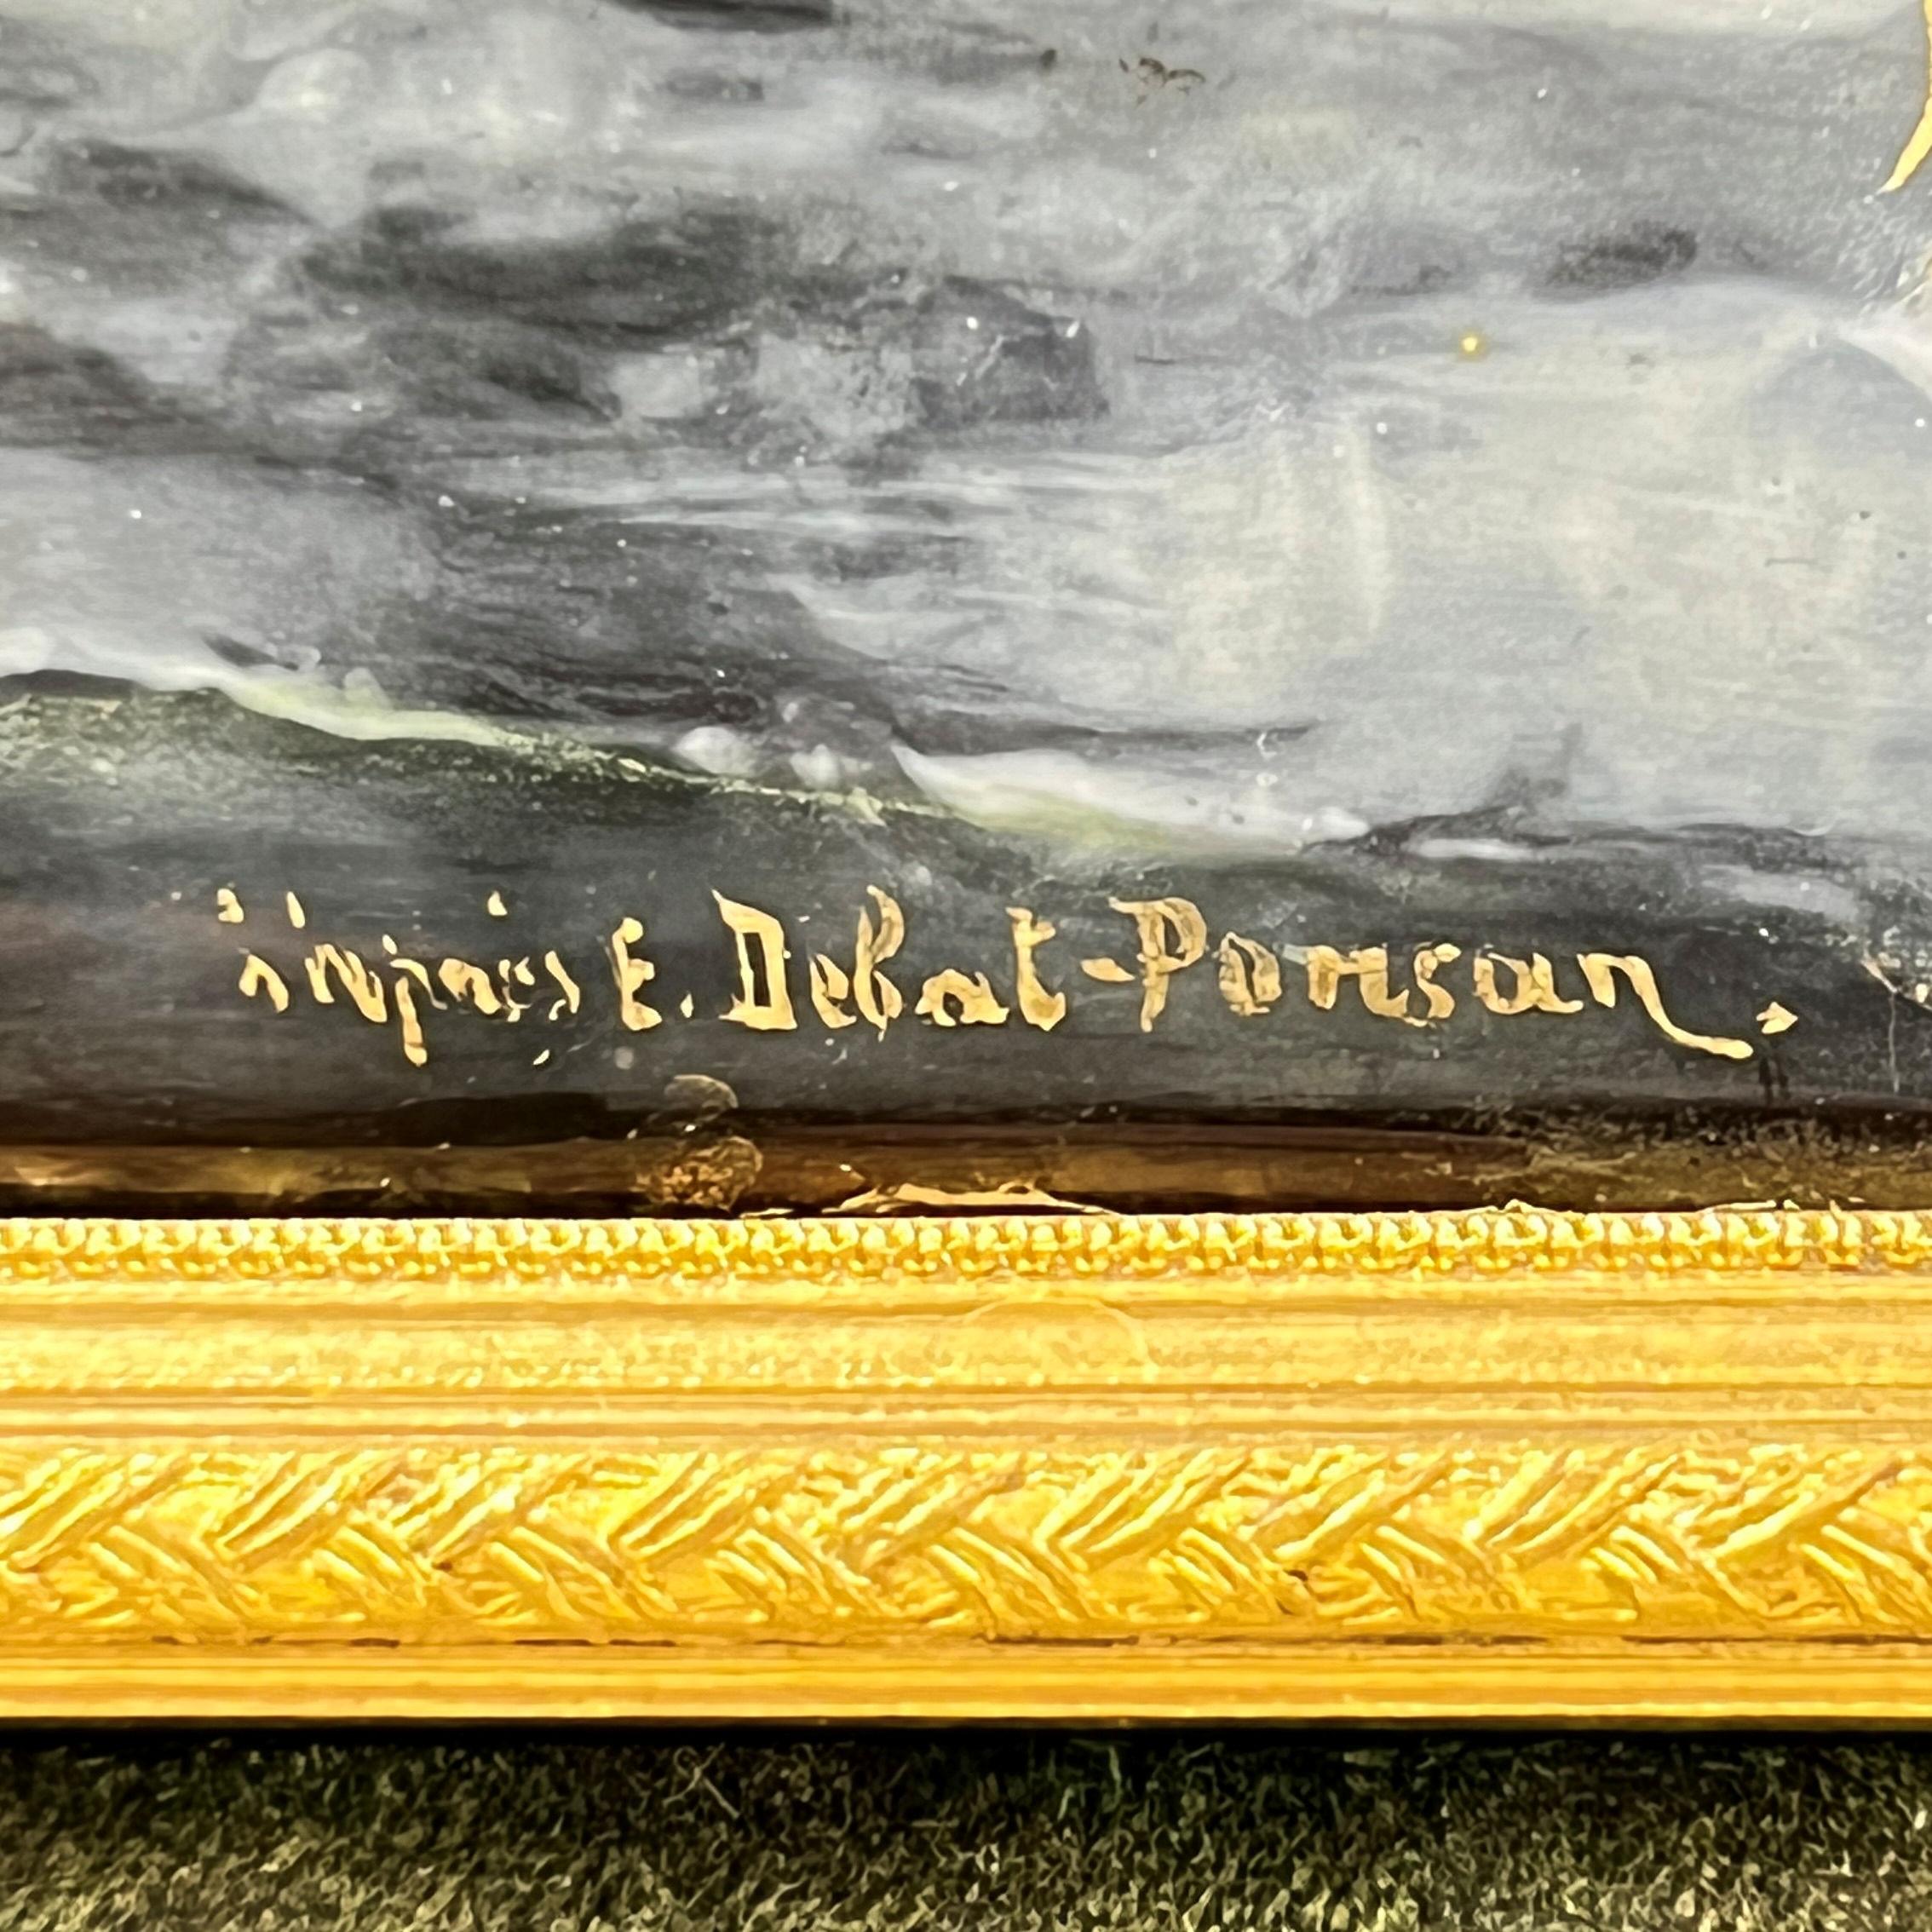 Edouard Debat-Ponsan Allegorical French Enamel Plaque In Good Condition For Sale In New York, NY